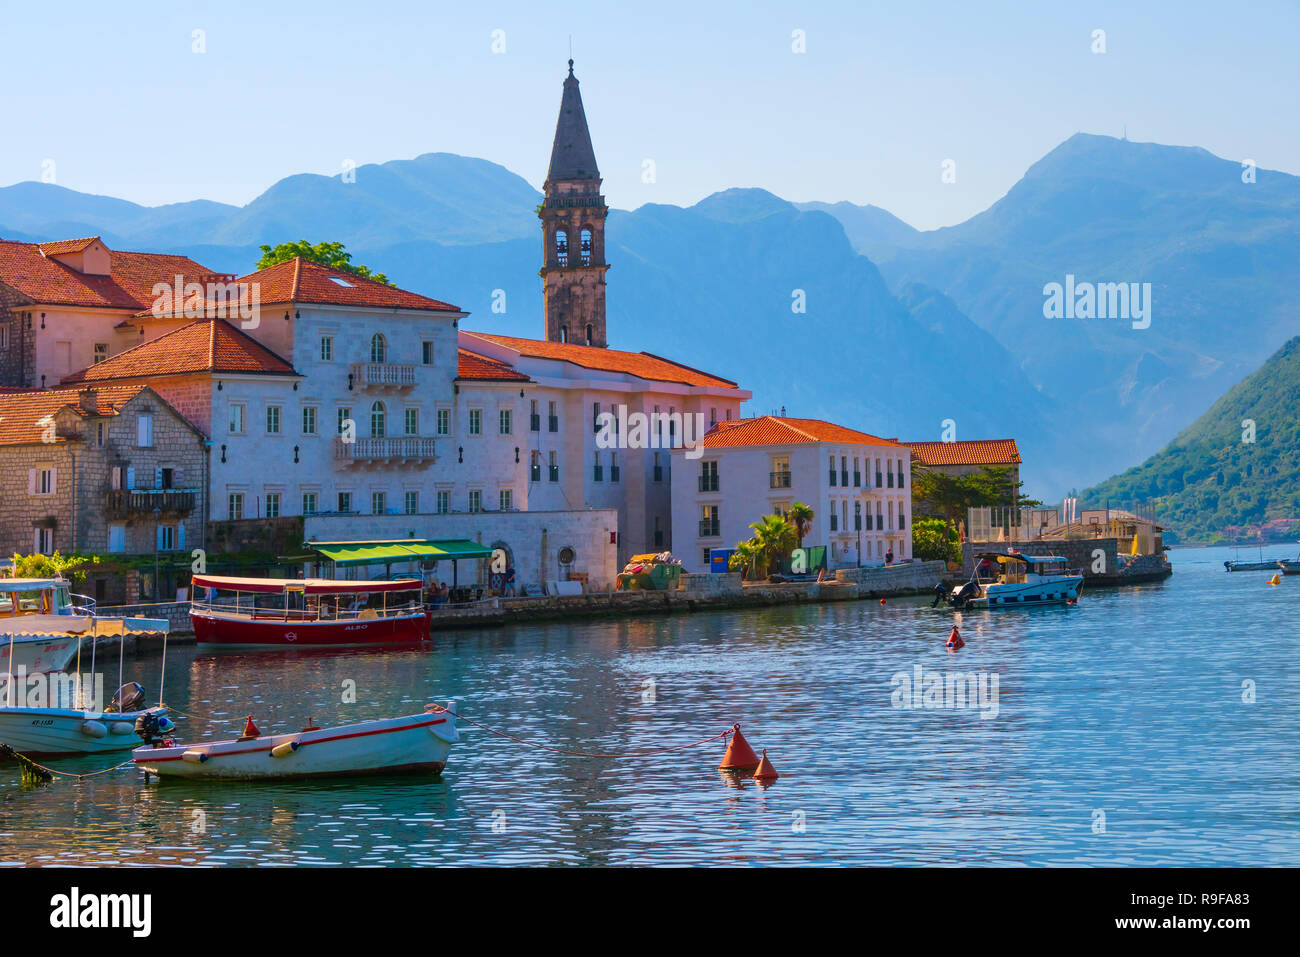 Church tower and houses on the Adriatic coast, Perast, Montenegro Stock Photo